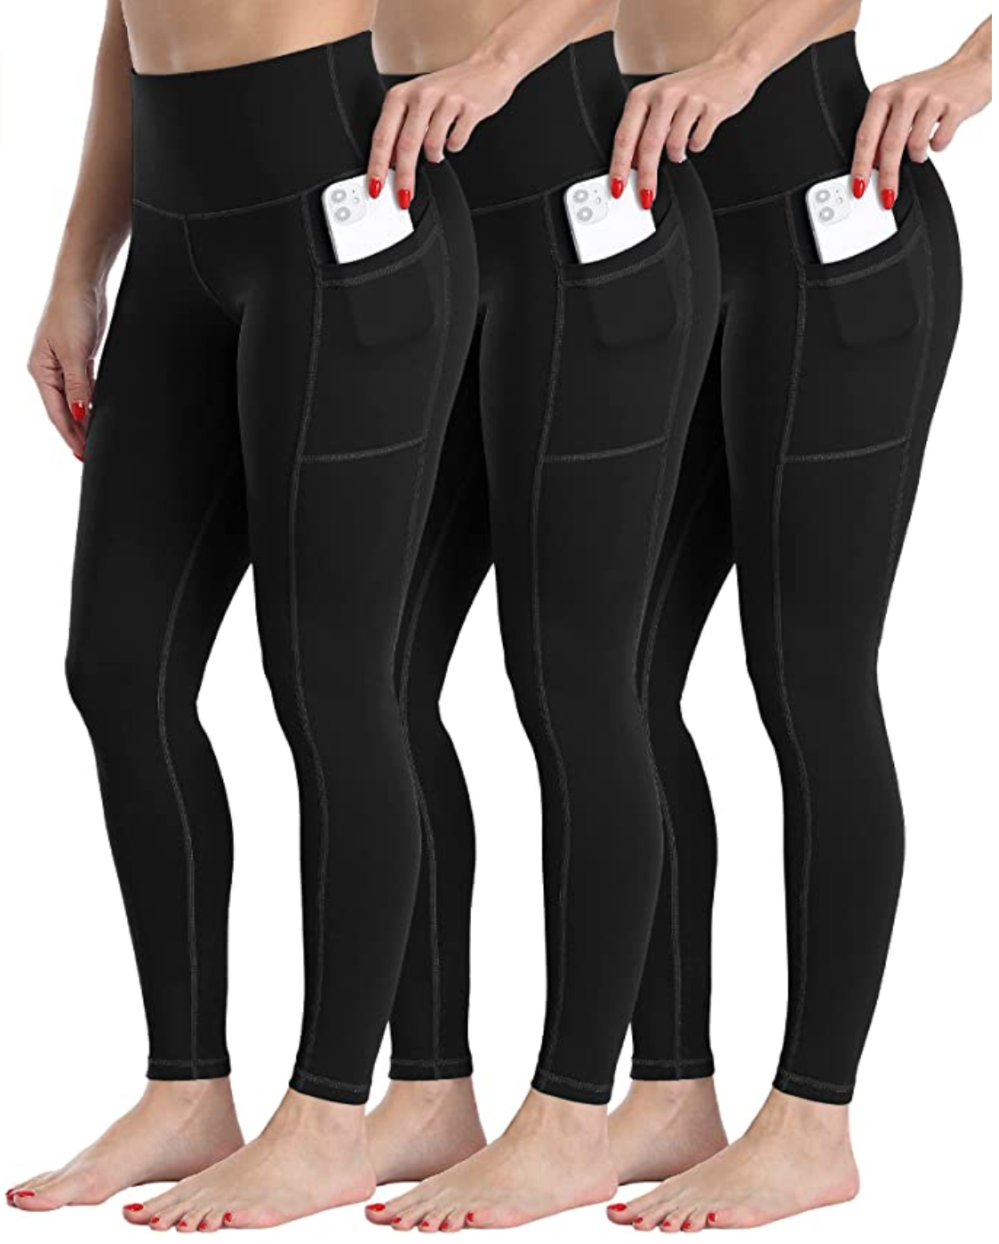 https://www.usmagazine.com/wp-content/uploads/2022/01/CHRLEISURE-Leggings-with-Pockets.png?w=1000&quality=86&strip=all